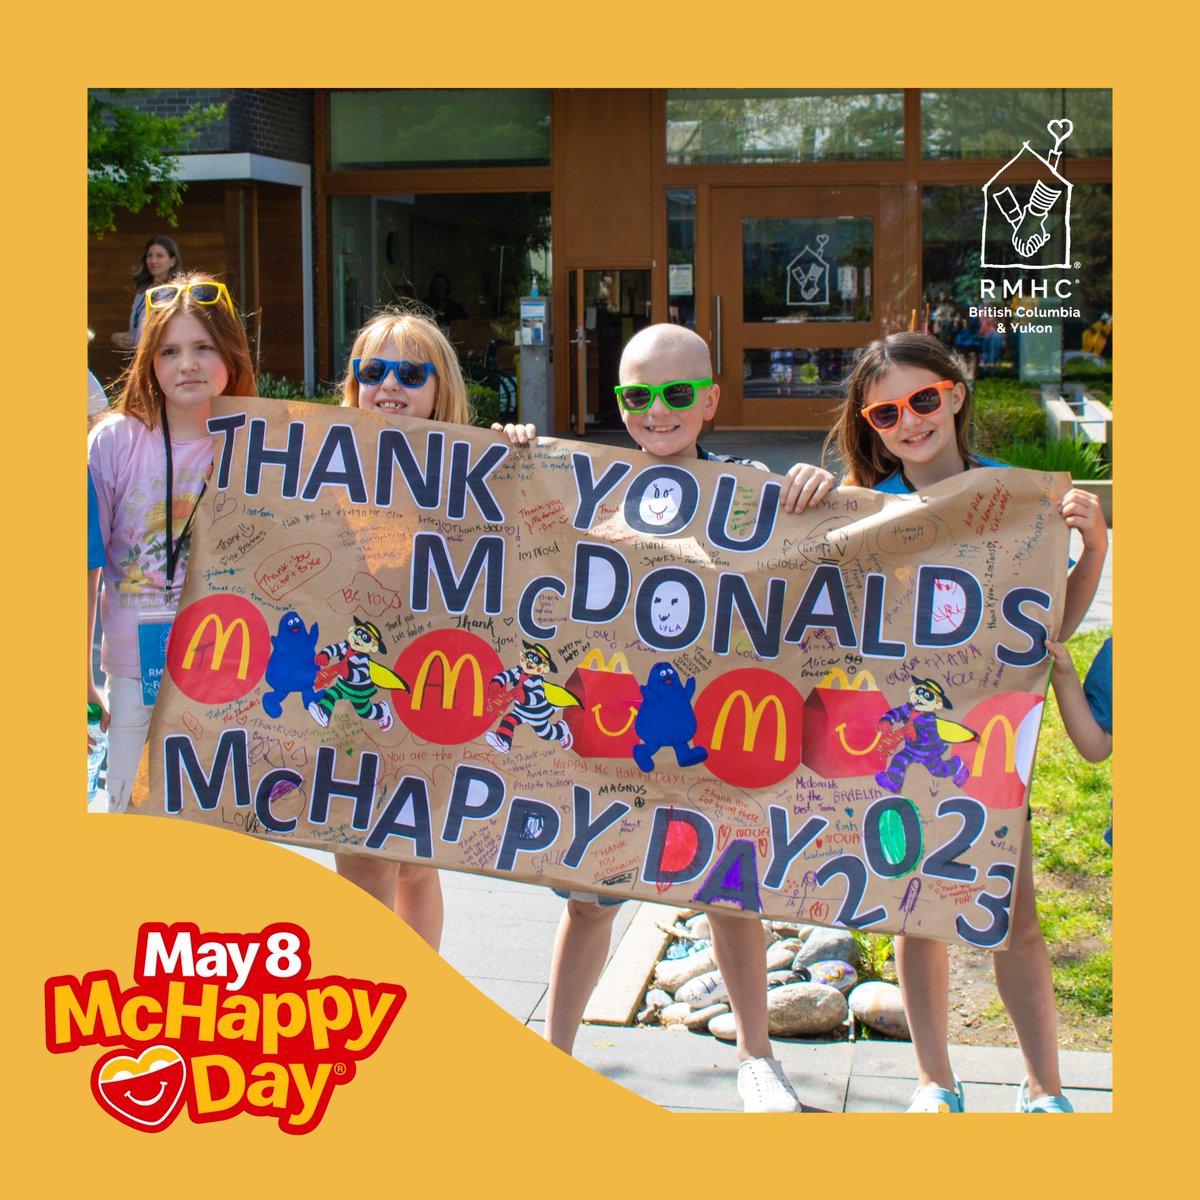 McHappy Day is on May 8th! 💓 You can support the families staying in RMHBC with sick children by purchasing from @McDonaldsCanada on #McHappyDay – and don’t forget to Round Up your order for RMHC at point-of-purchase – every little bit helps! 💖 #KeepingFamiliesClose